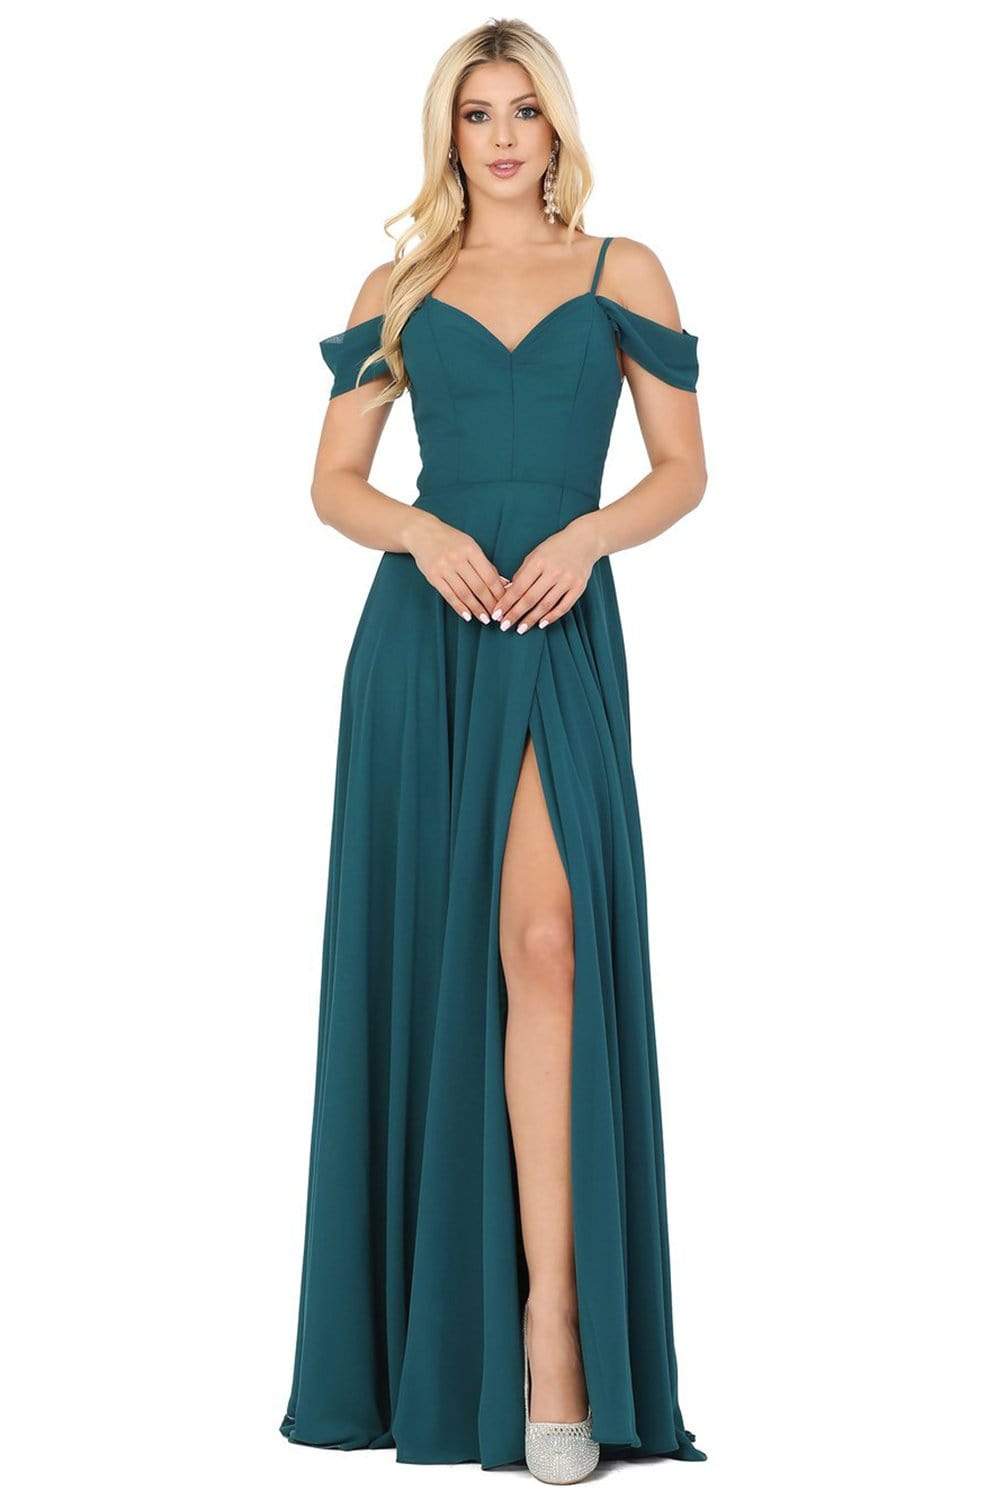 Dancing Queen - 2961 Lace Back Cold Shoulder A-Line Prom Dress Prom Dresses XS / Hunter Green